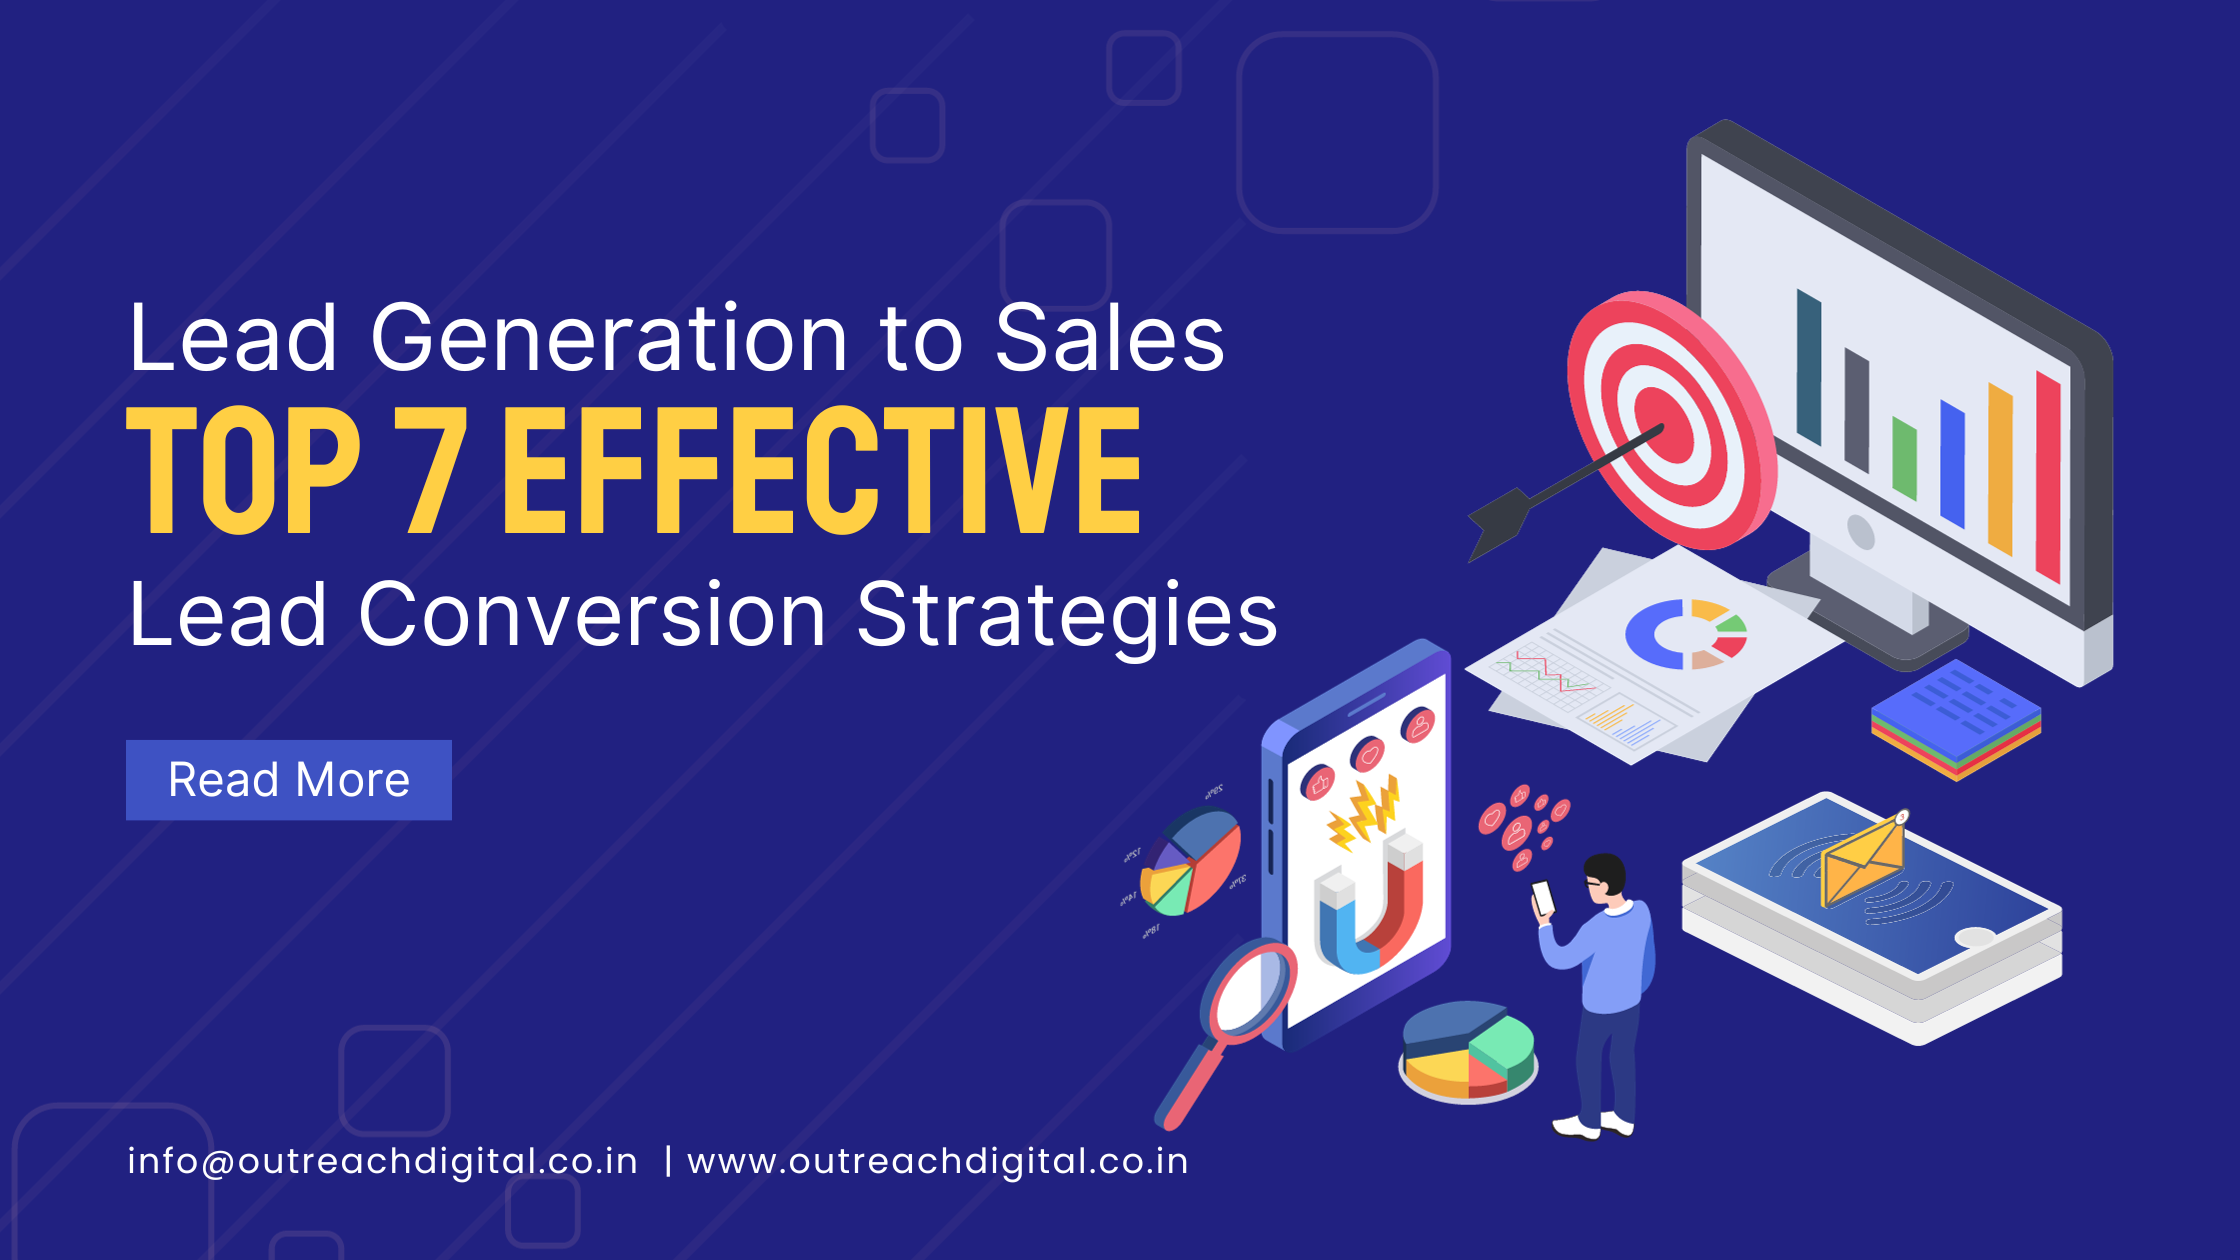 From Lead Generation to Sales: Top 7 Effective Lead Conversion Strategies